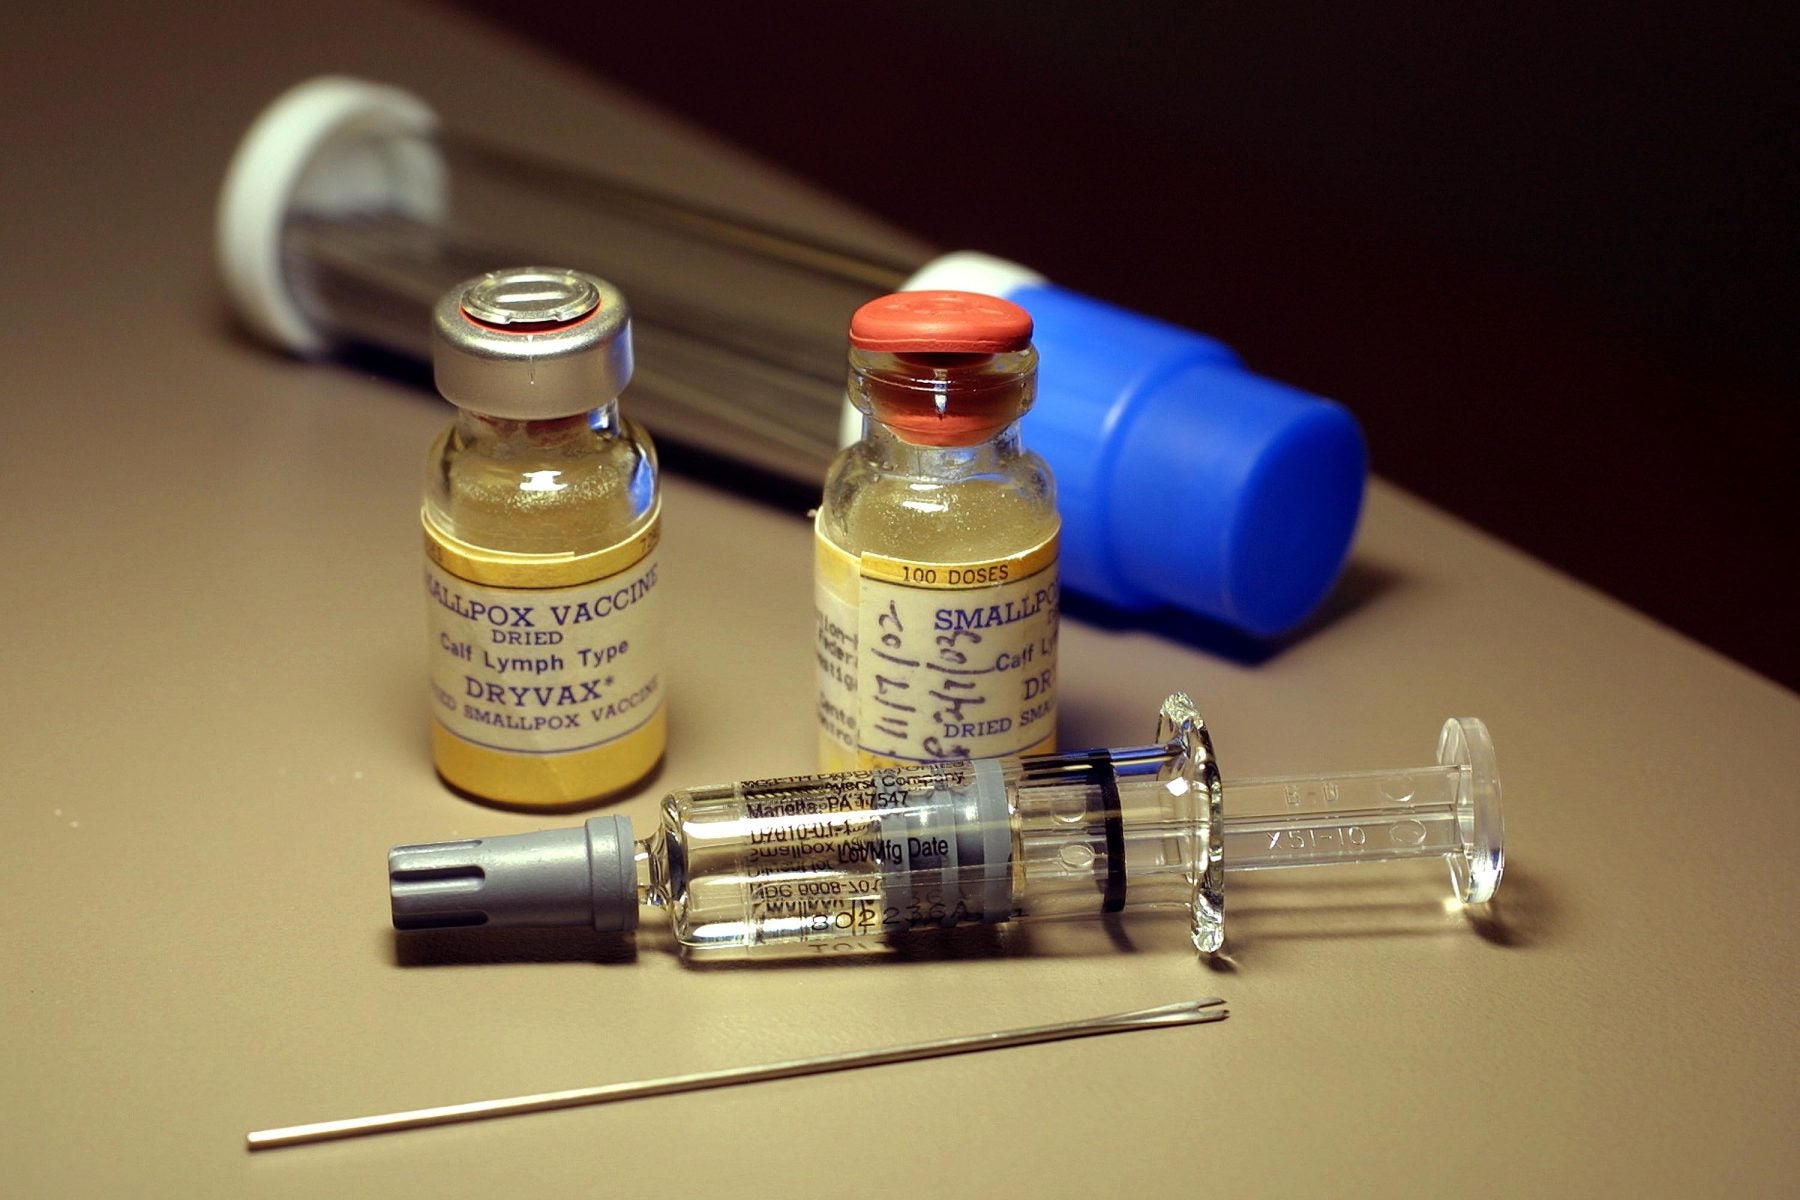 Vials of Smallpox vaccinations alongside the medical tools to administer the vaccine